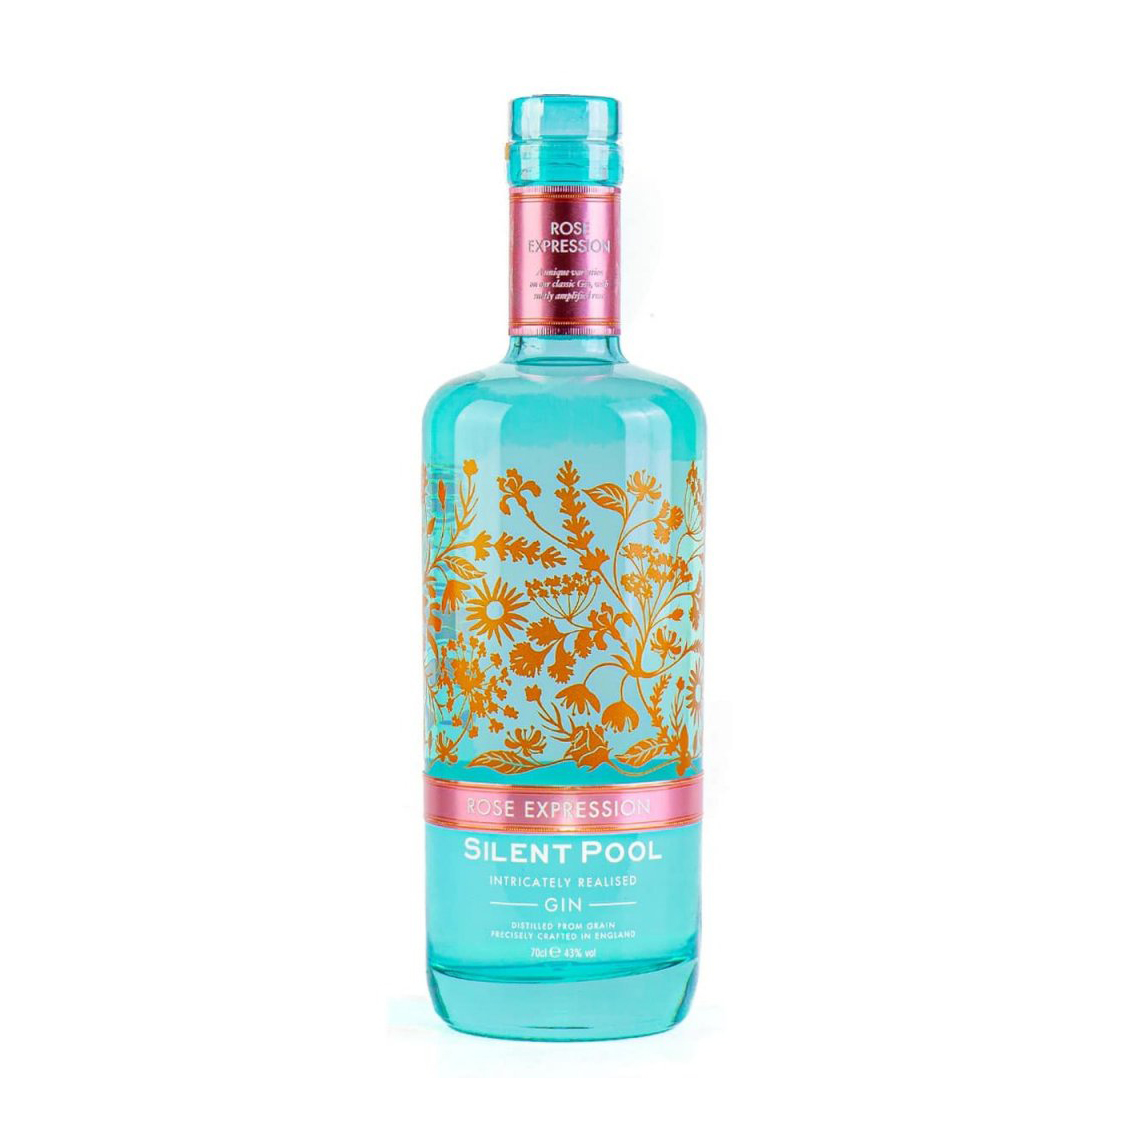 Silent Pool Rose Expression Gin 43% 0,7 l